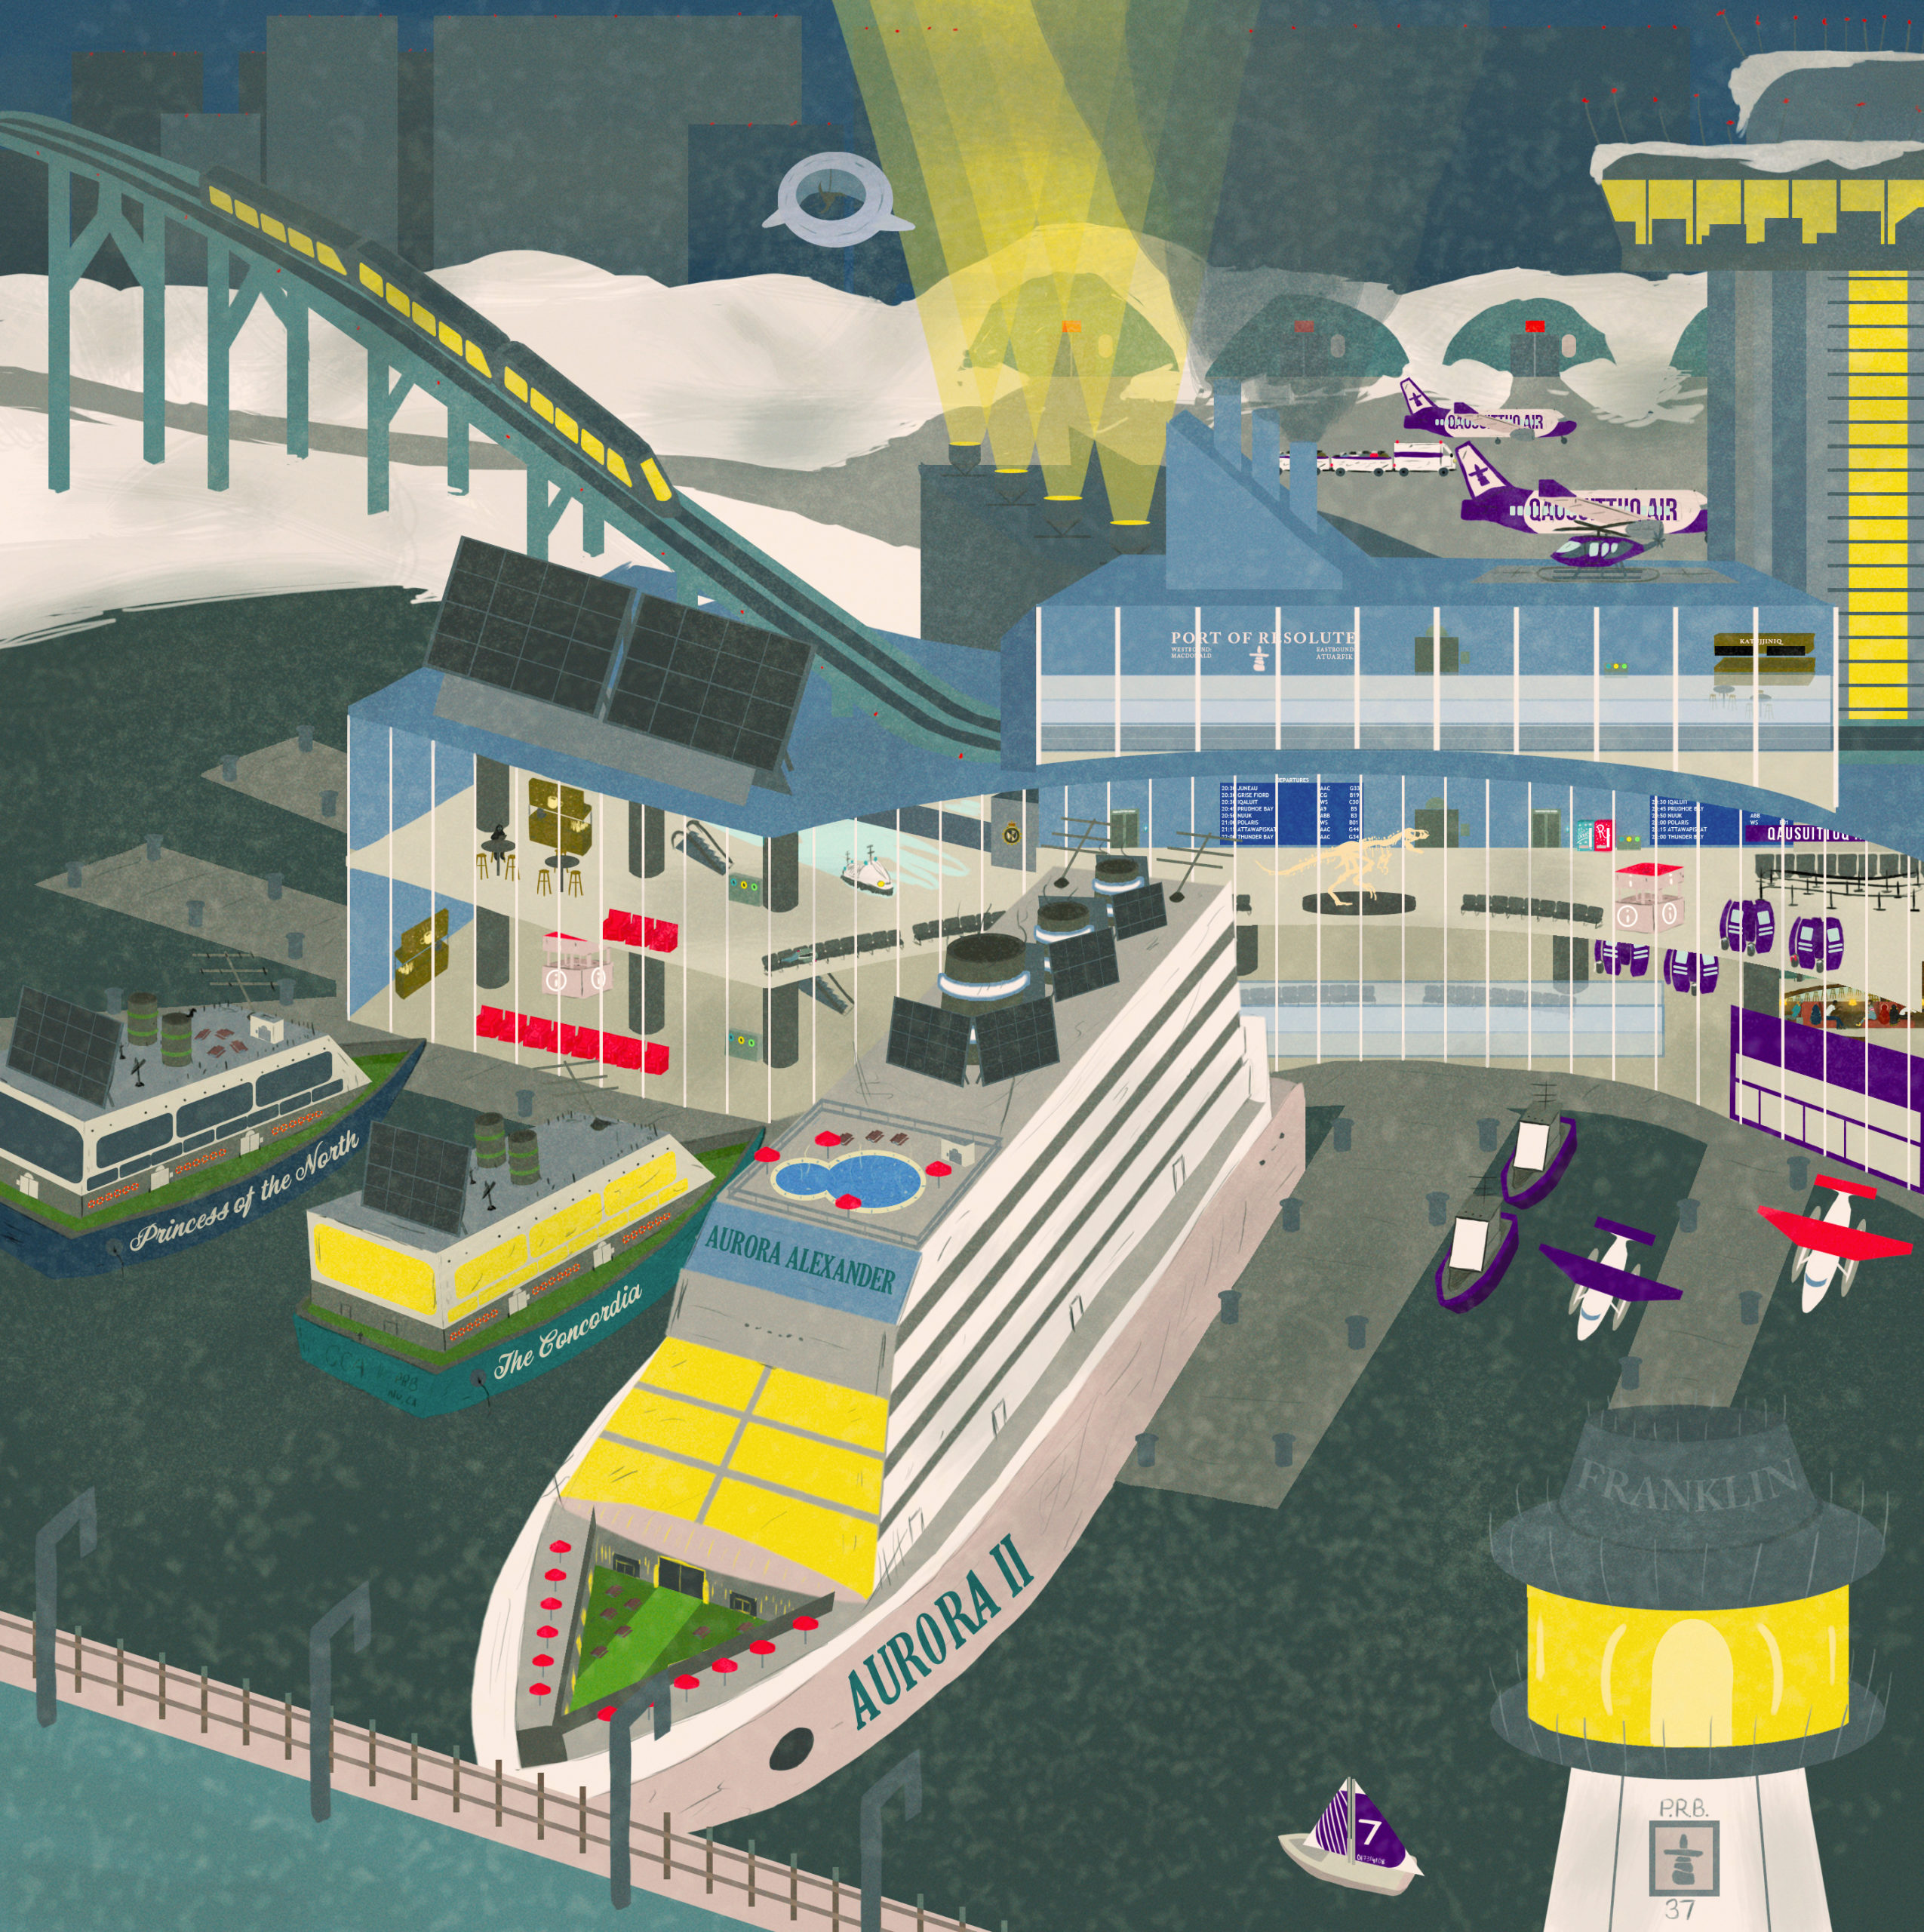 A detailed illustration of the exterior of the Port of Resolute. To the bottom of the illustration, large cruiseships are docked at the port. Behind the buildings, airplanes are visible on the tarmac. There is a maglev train running into the port's station and lots of activity inside the glass windows of the port. The colour palette is cool, stormy grey, and the art style is lineless.